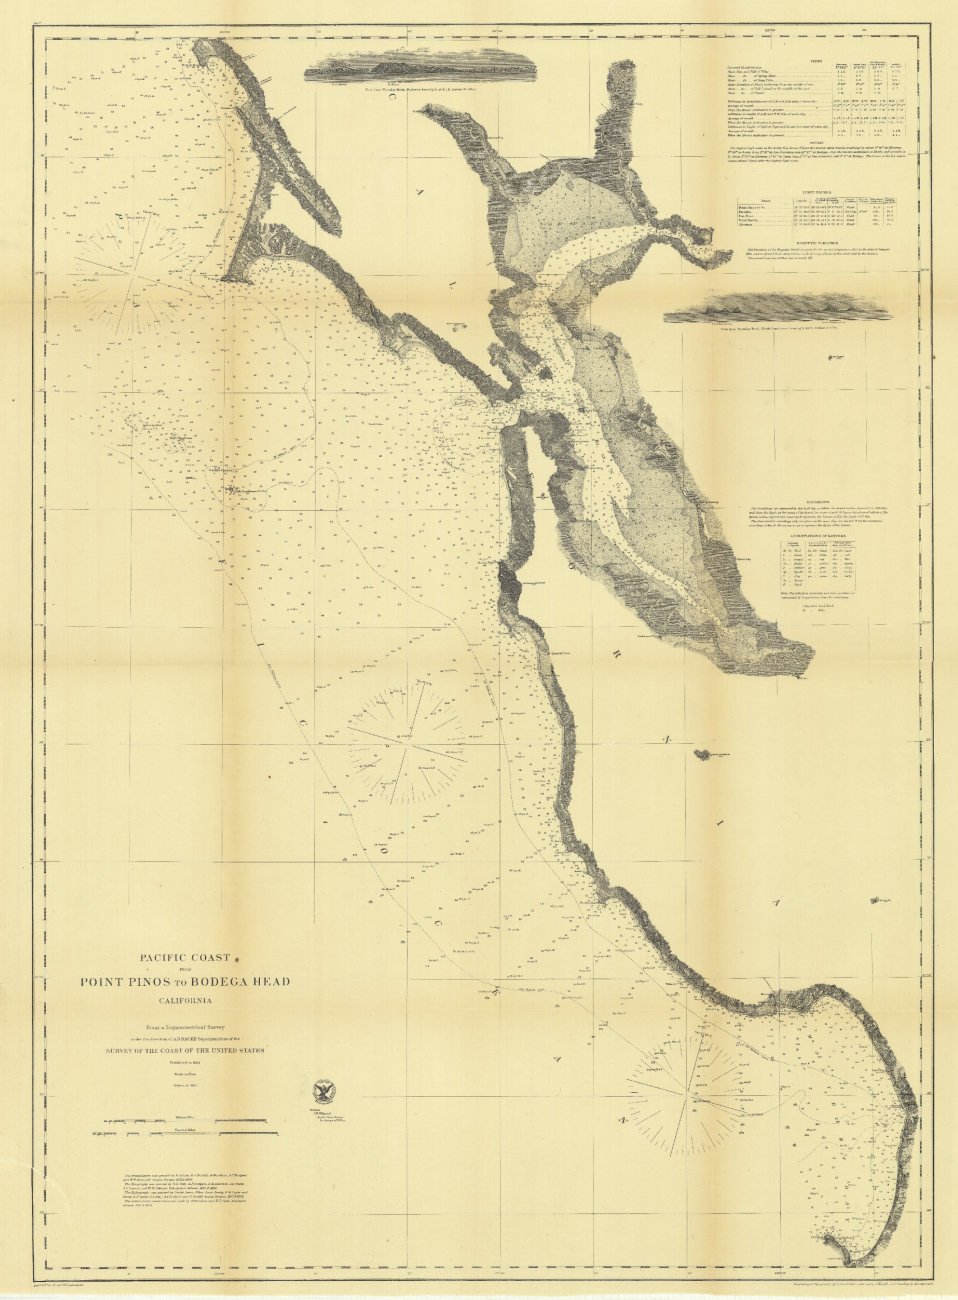 Chart of California coast from Point Pinos to Bodega Head first published in1862